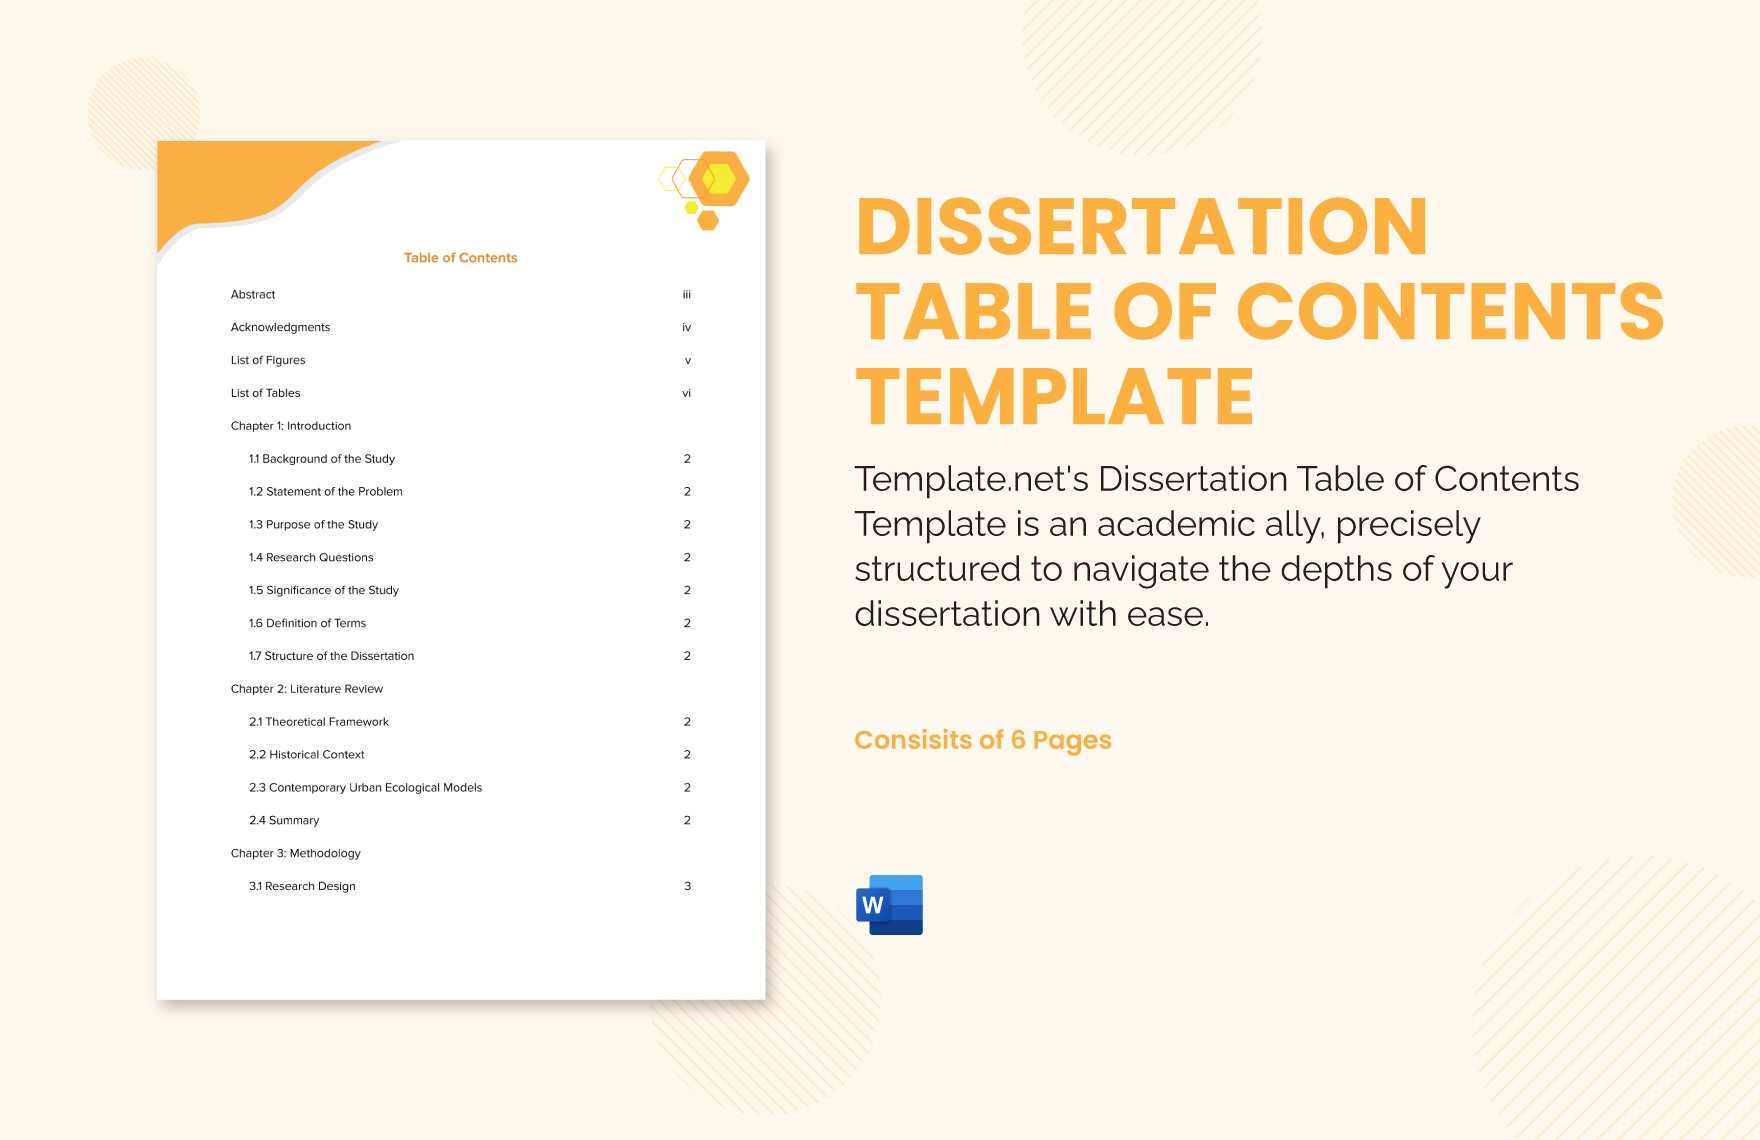 Dissertation Table of Contents Template